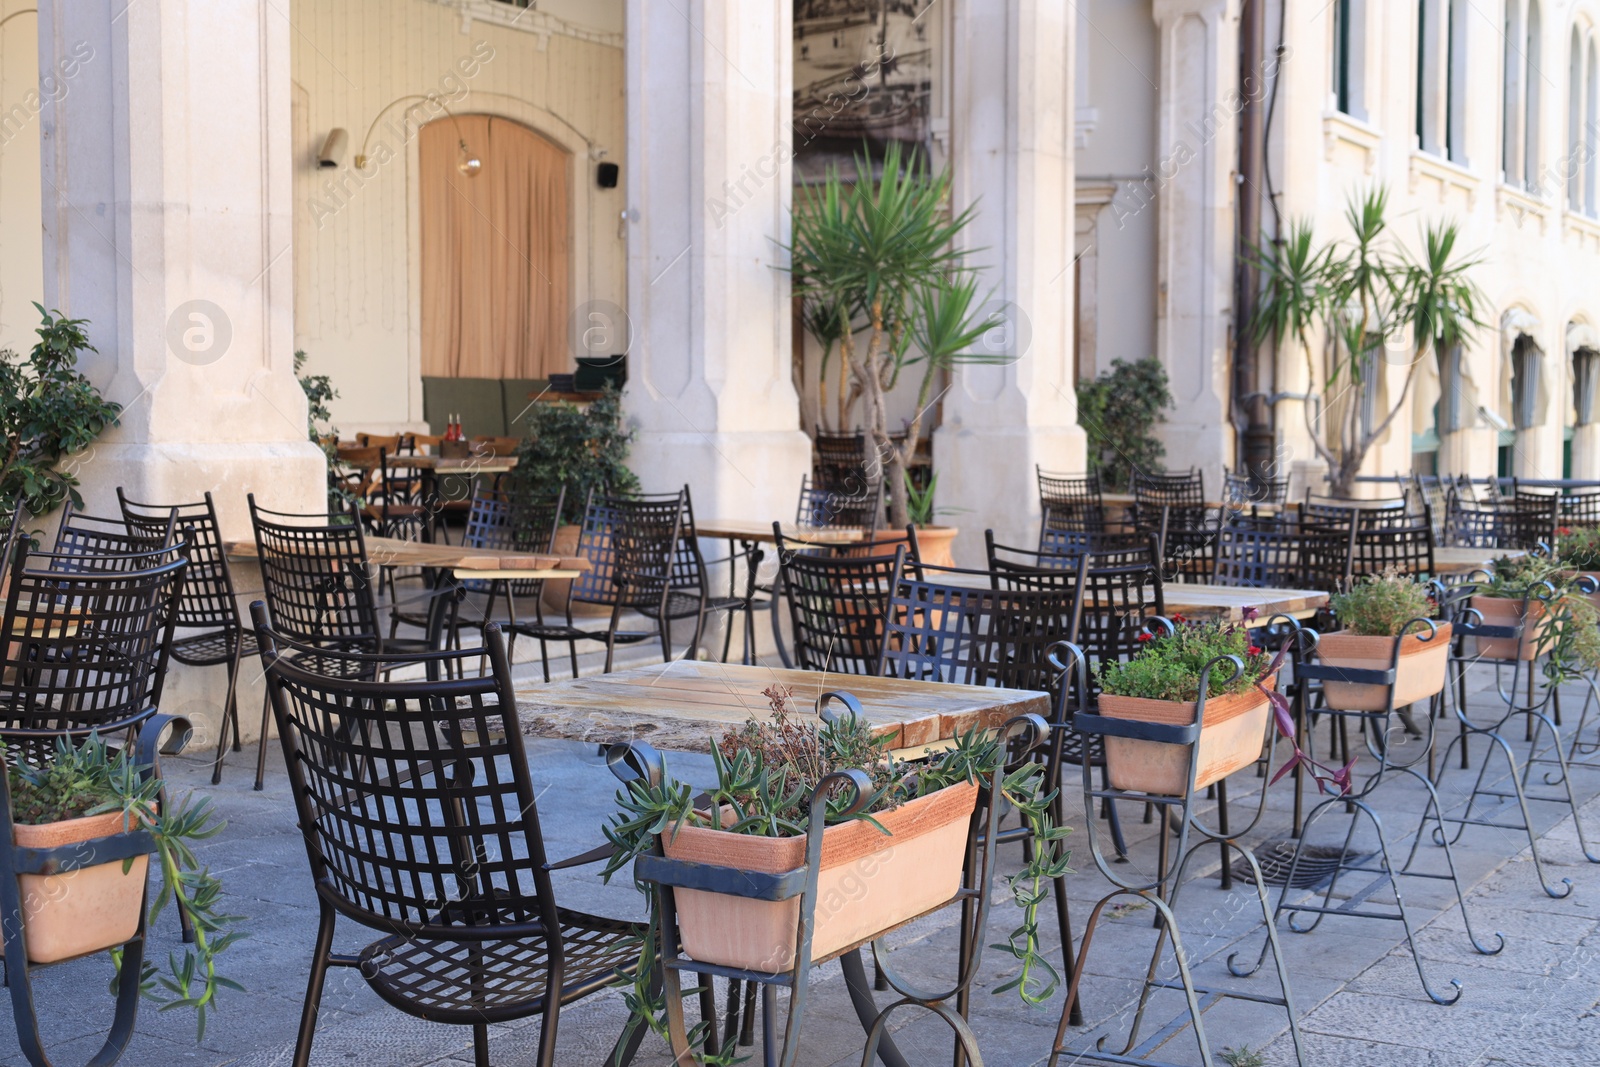 Photo of Outdoor cafe with stylish furniture and plants in pots